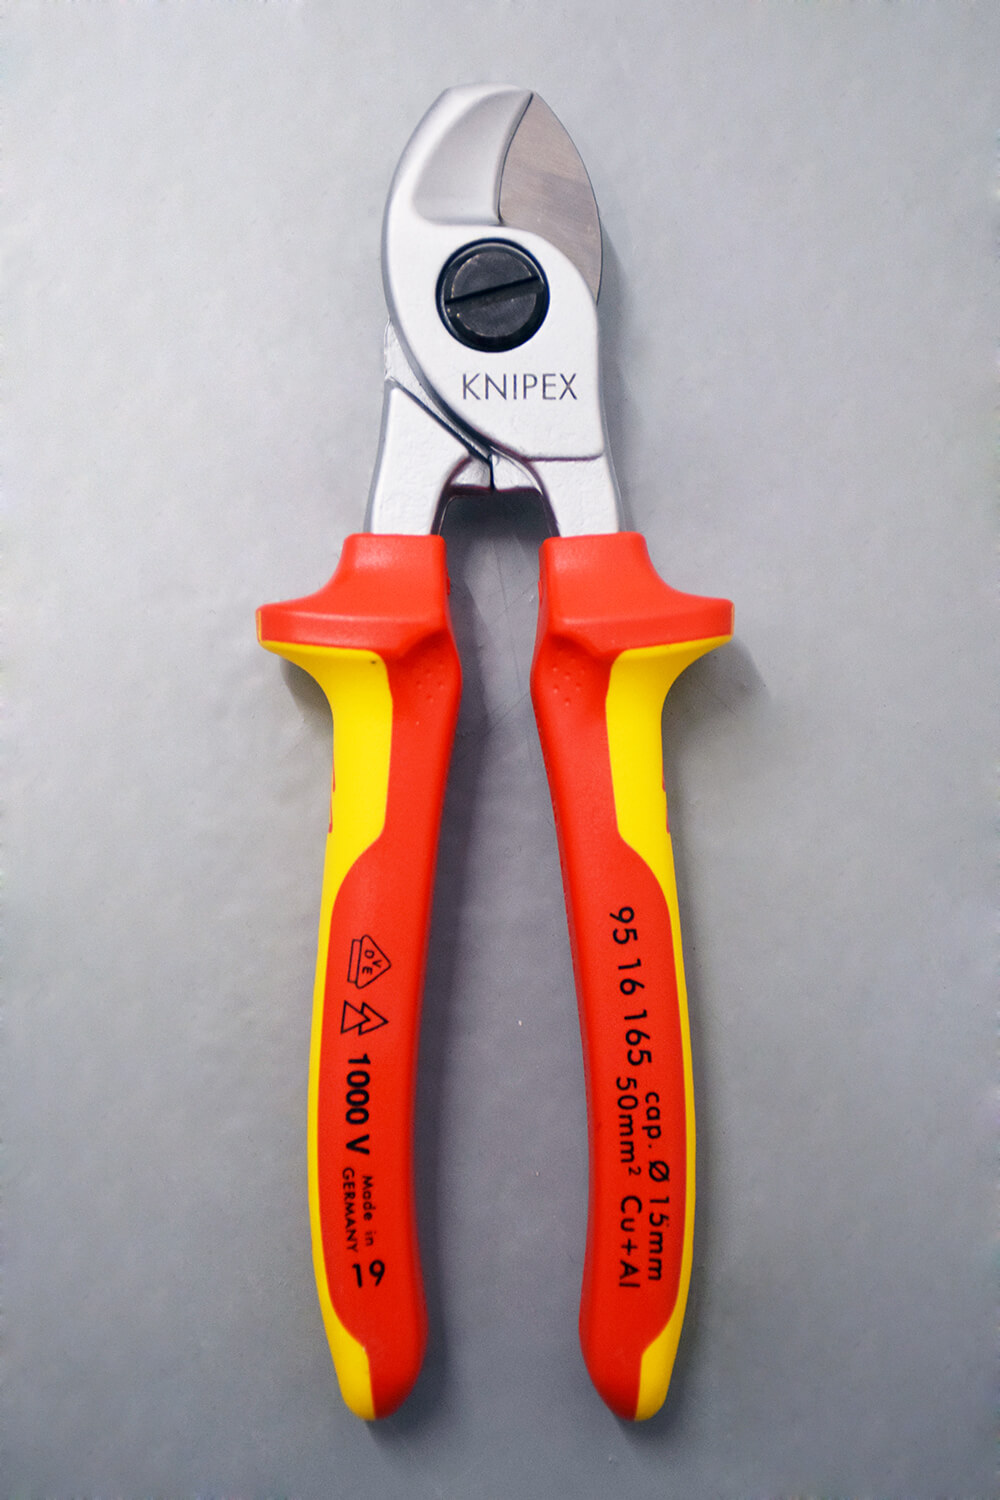 Knipex Cable Shears Tool Review, Cable Cutters